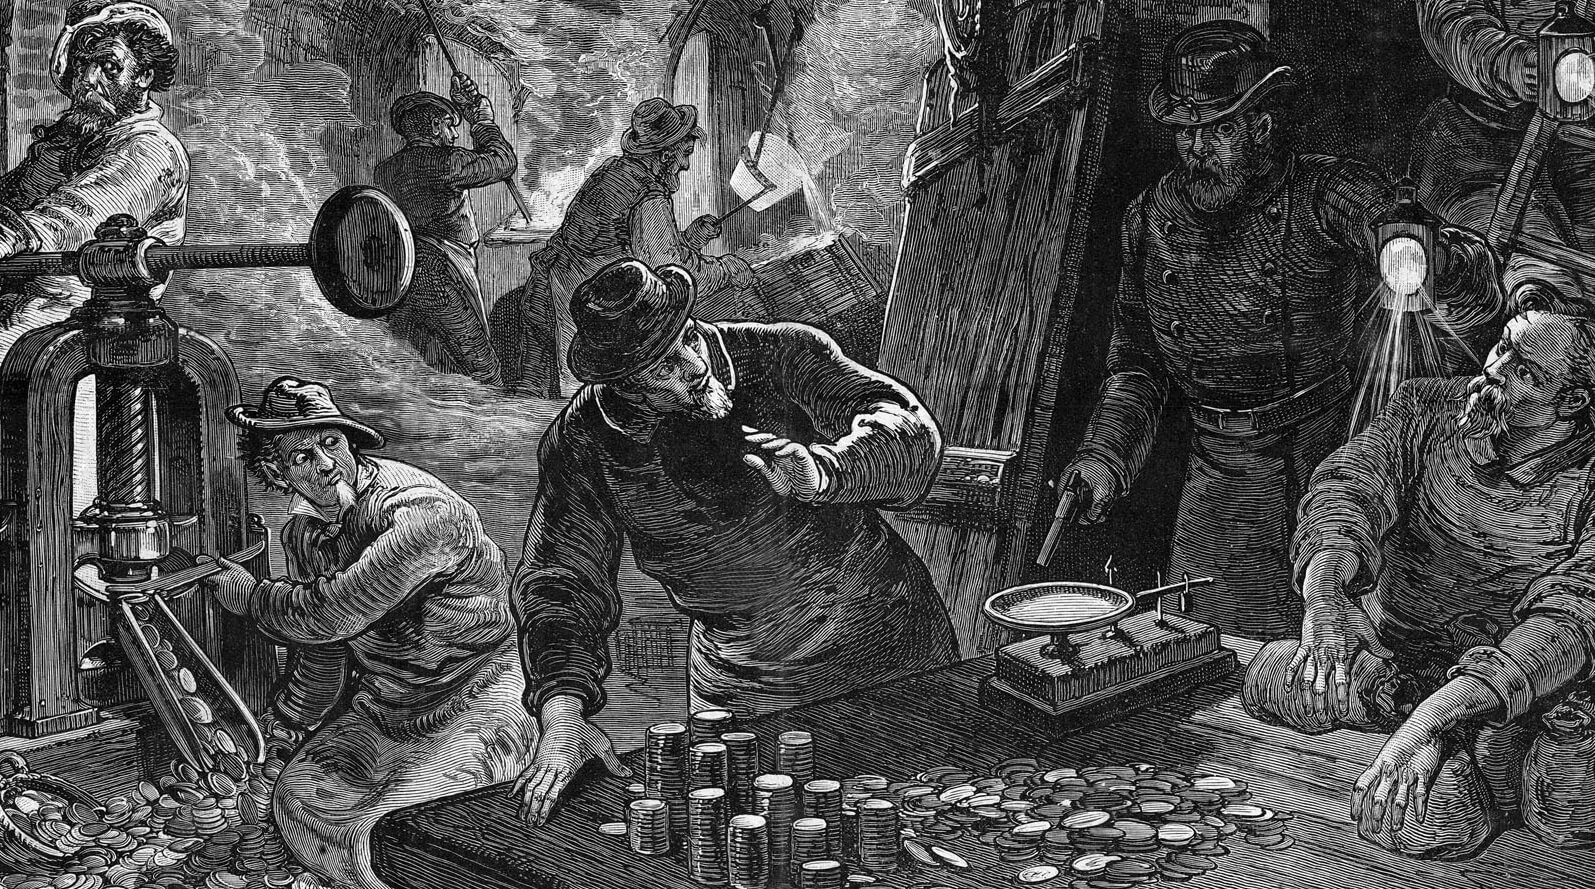 Artist rendition of a historical Secret Service counterfeit coin raid in 1875.